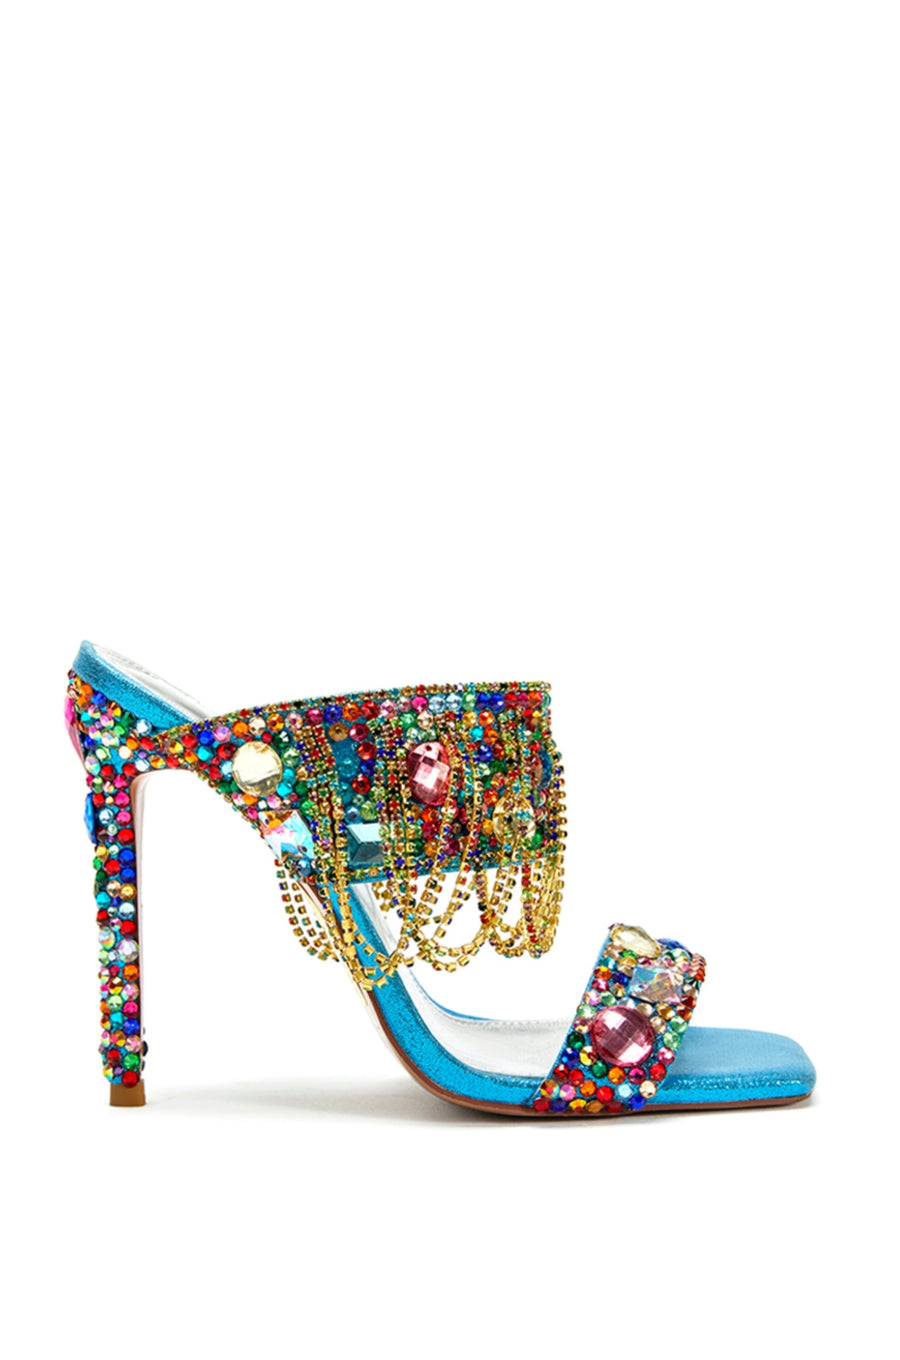 open toe square cut stiletto heels with colorful rhinestone embellishments and gold chain accent draping the shoe